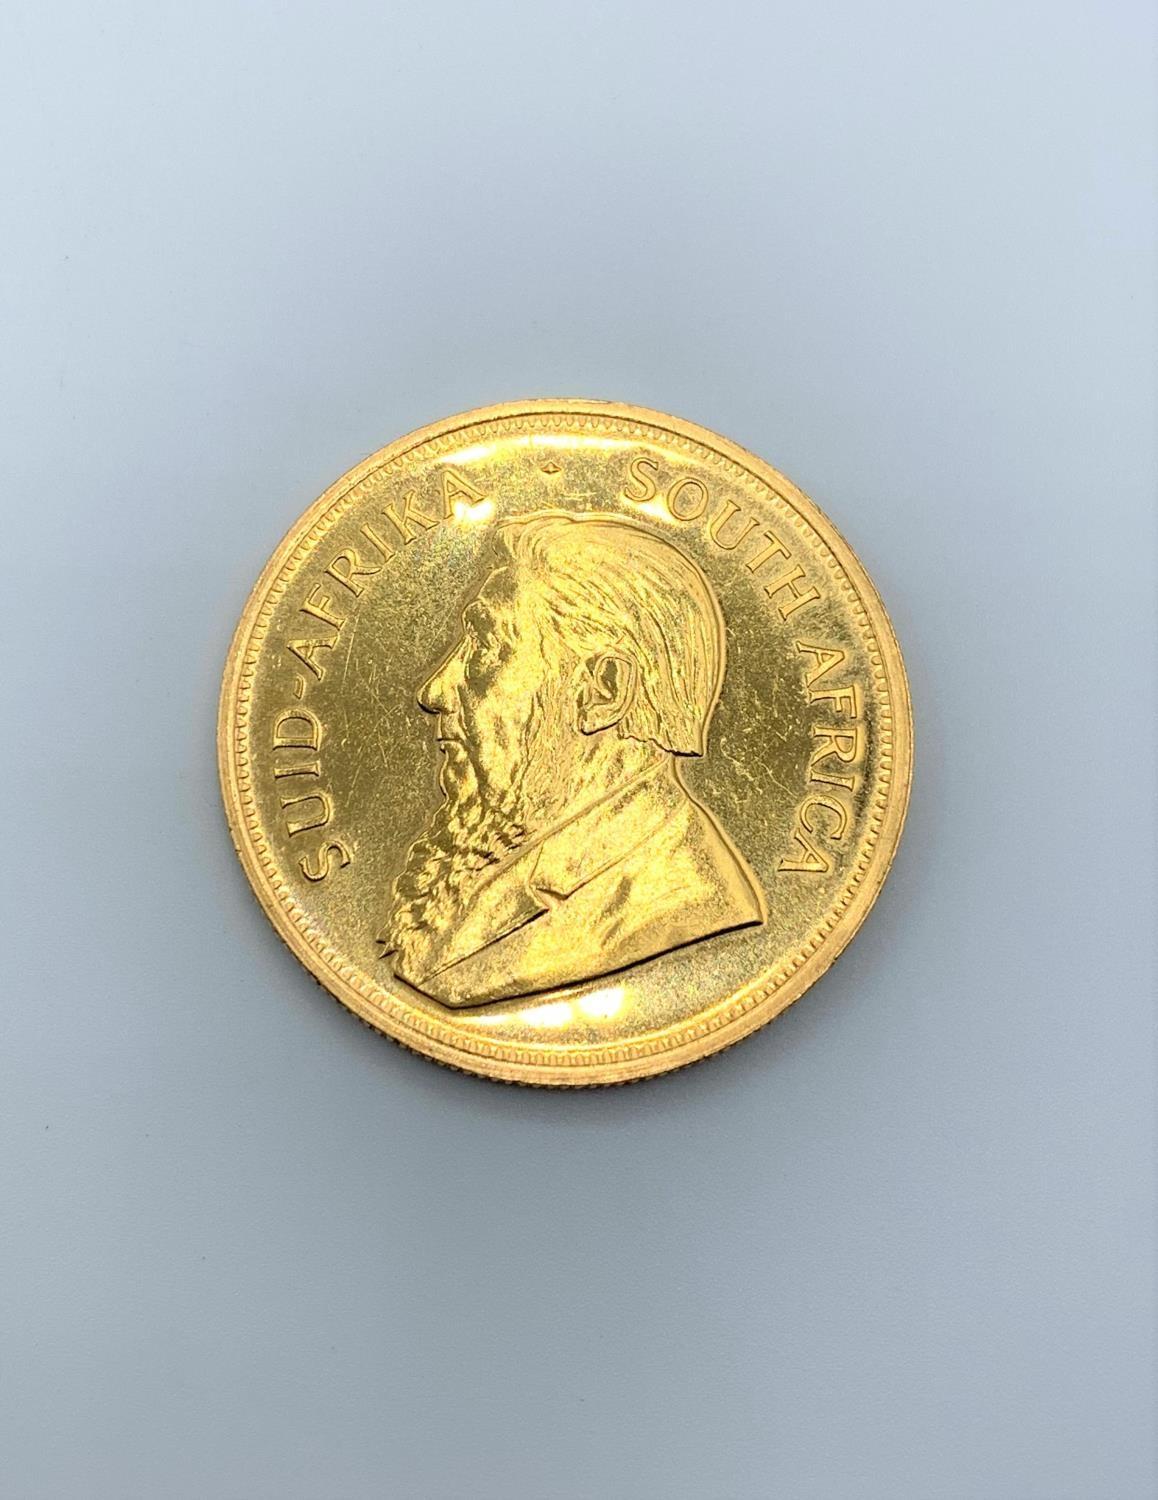 Krugerrand Coin Minted in 1982 CI03 Fine Gold - Image 3 of 3